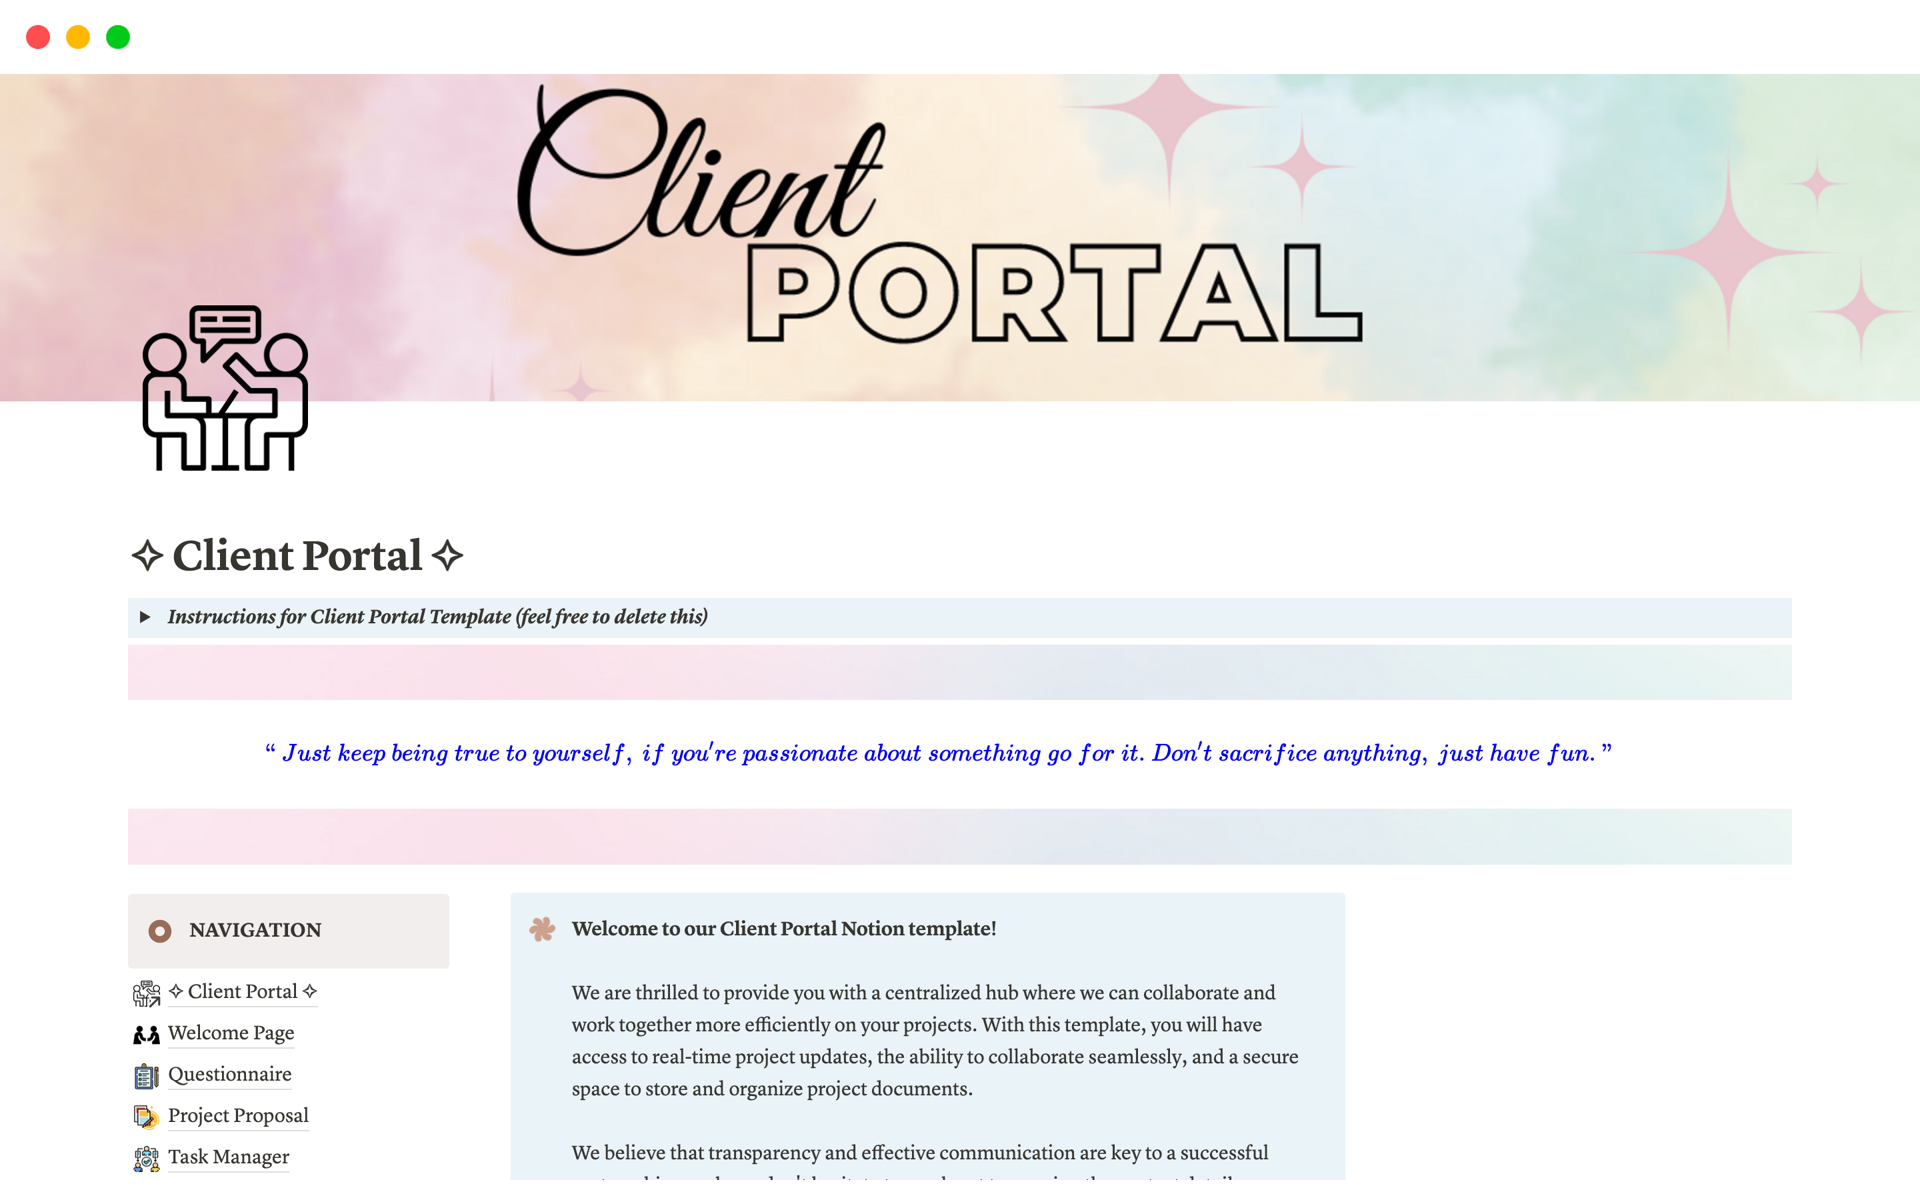 Notion Template Client Portal is designed for freelancers, entrepreneurs, and small business owners This template will be a central dashboard where you can share documents and track projects together.